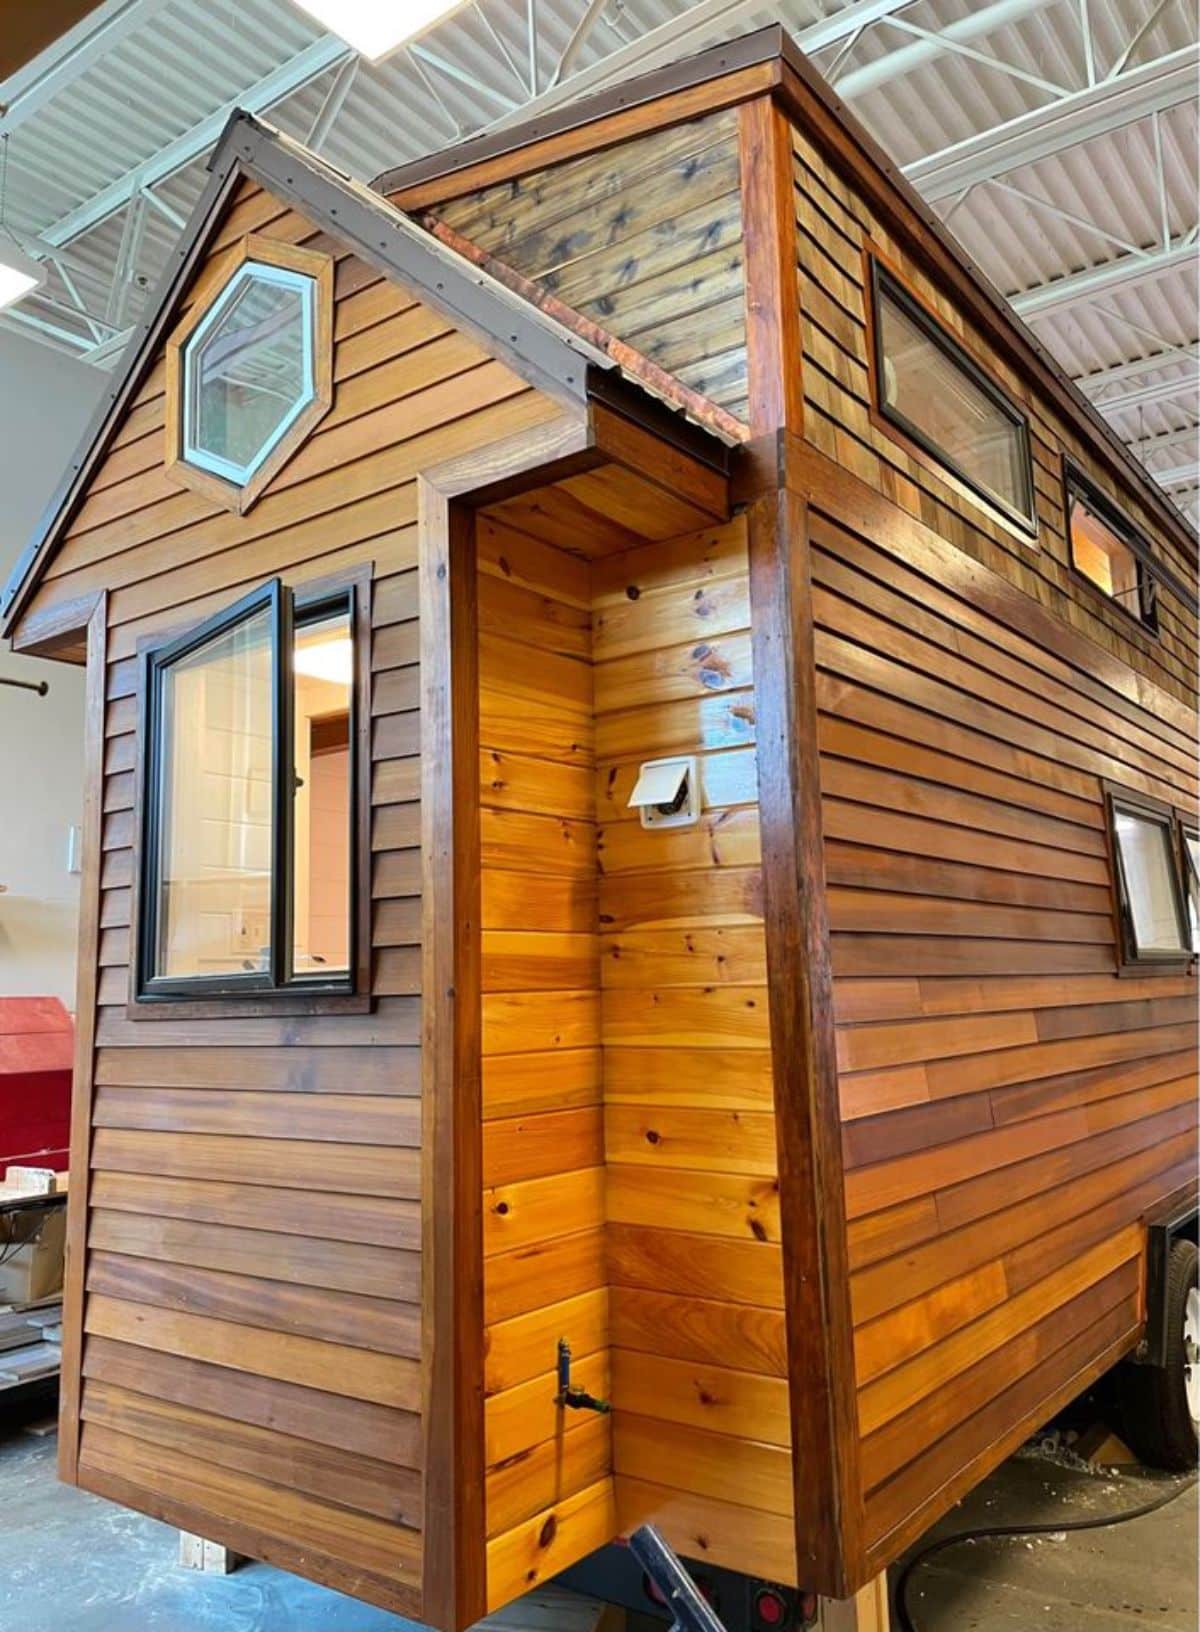 Huge windows of 1 Bedroom Tiny House from outside